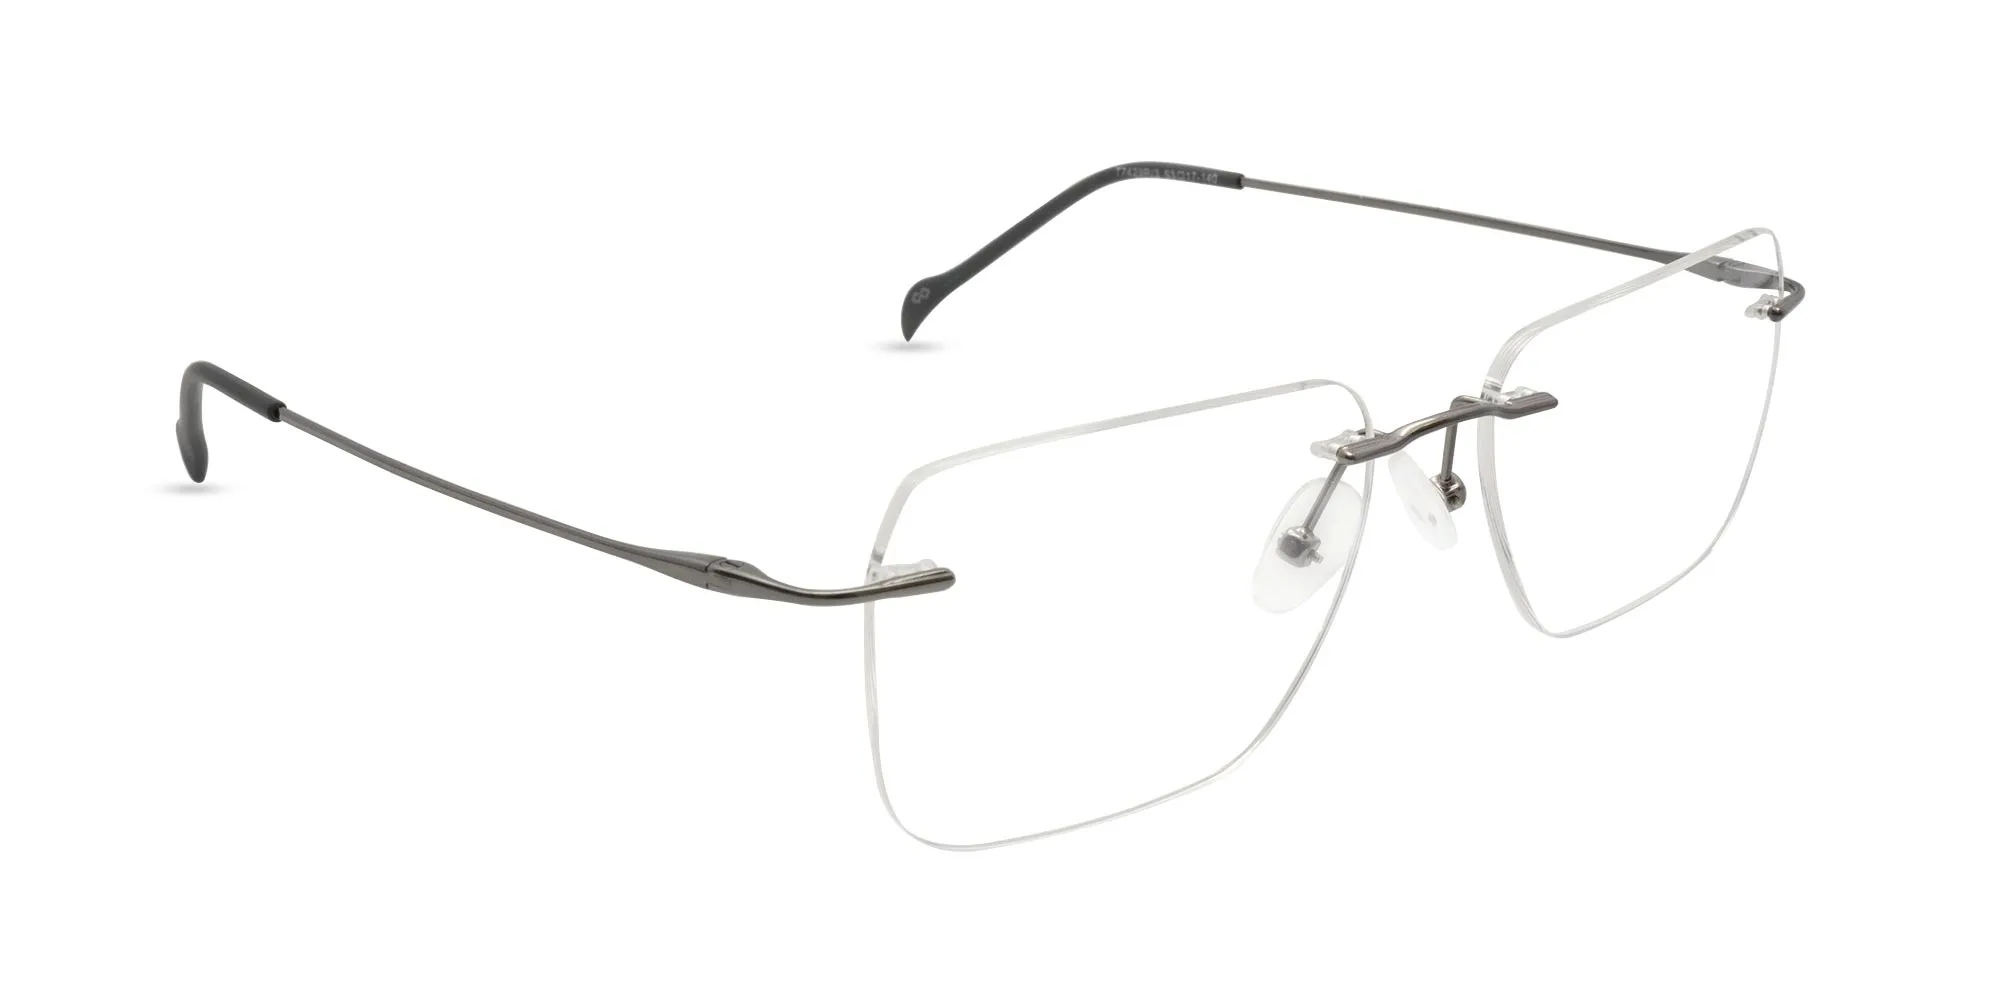 WITHAM 3 - Rimless Glasses Online | Specscart.®